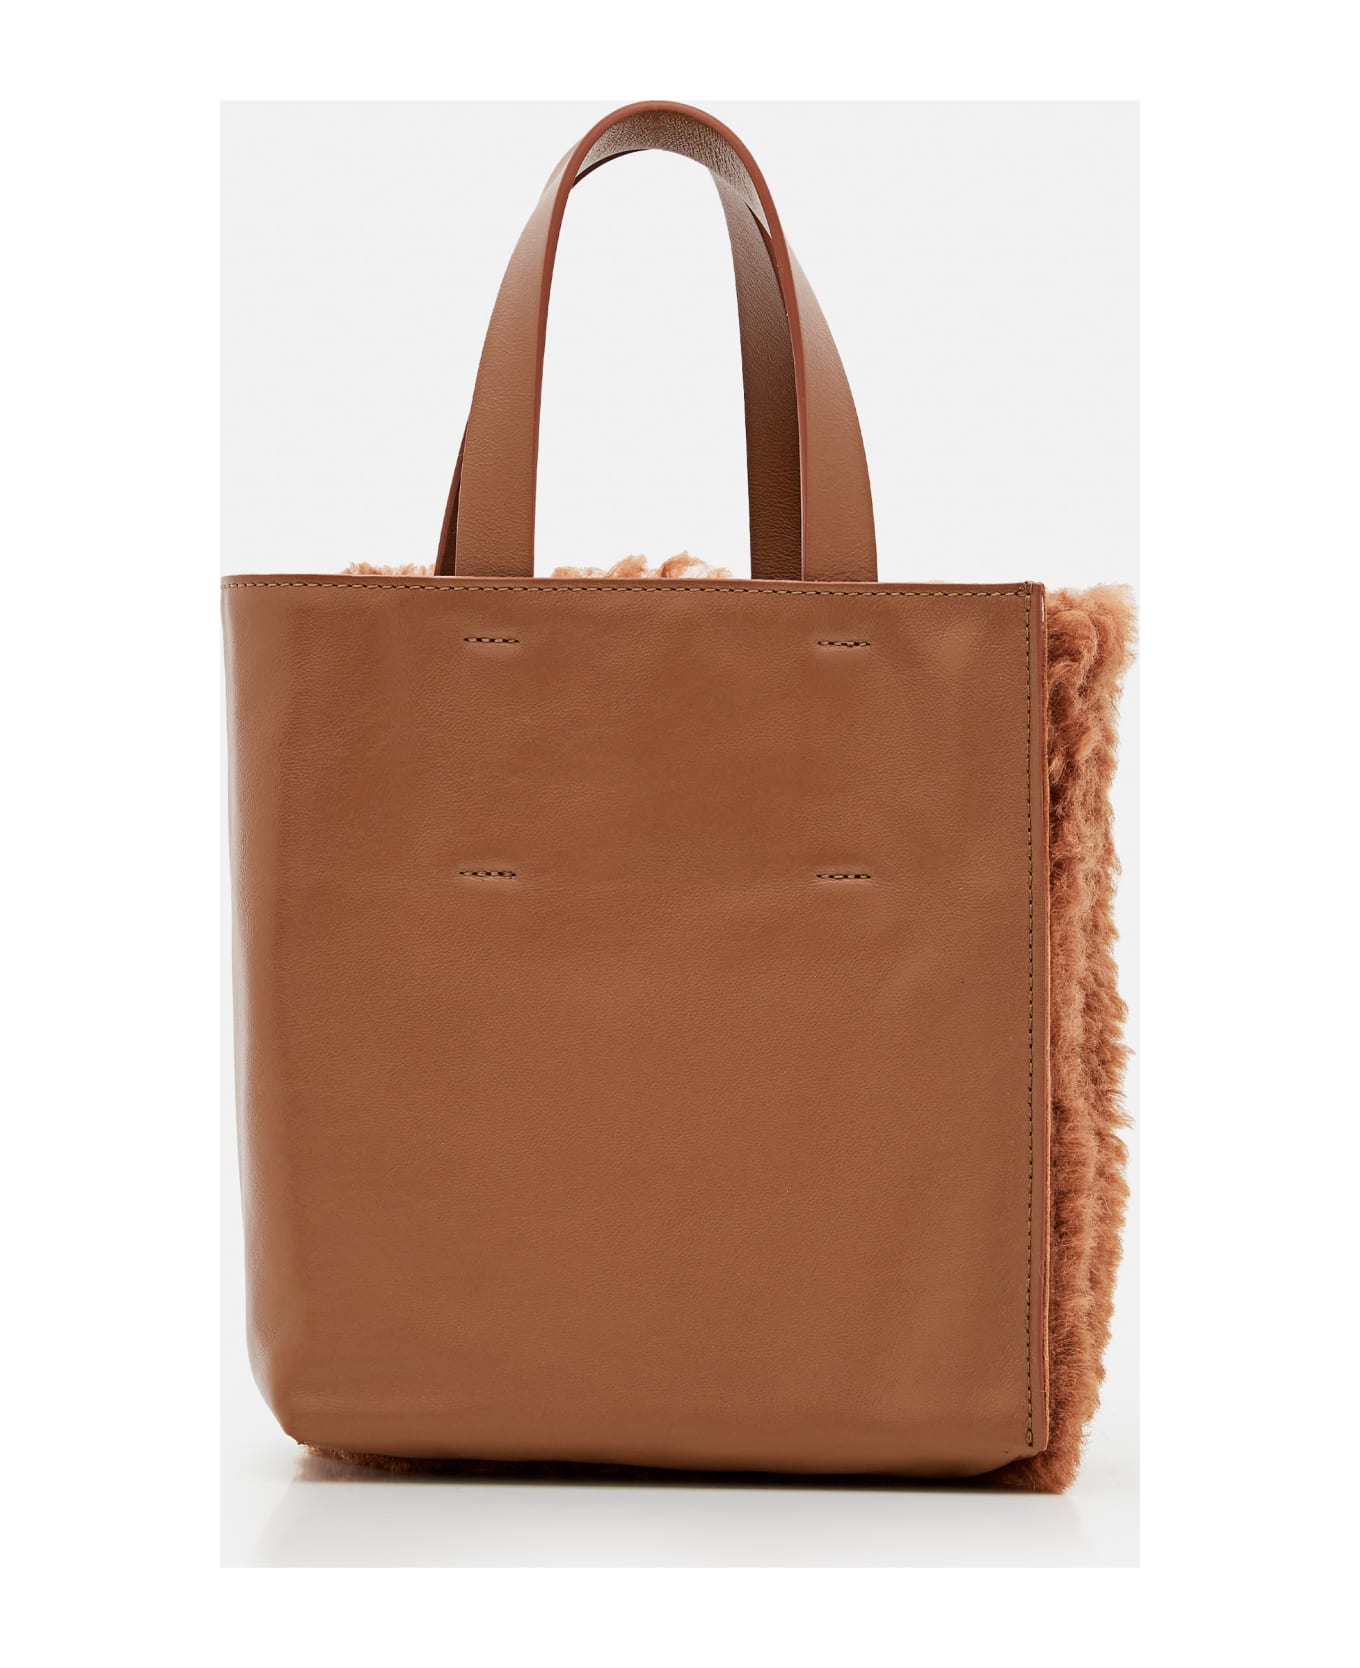 Marni Shearling Museo Soft Mini Tote Bag - Bisquit トートバッグ